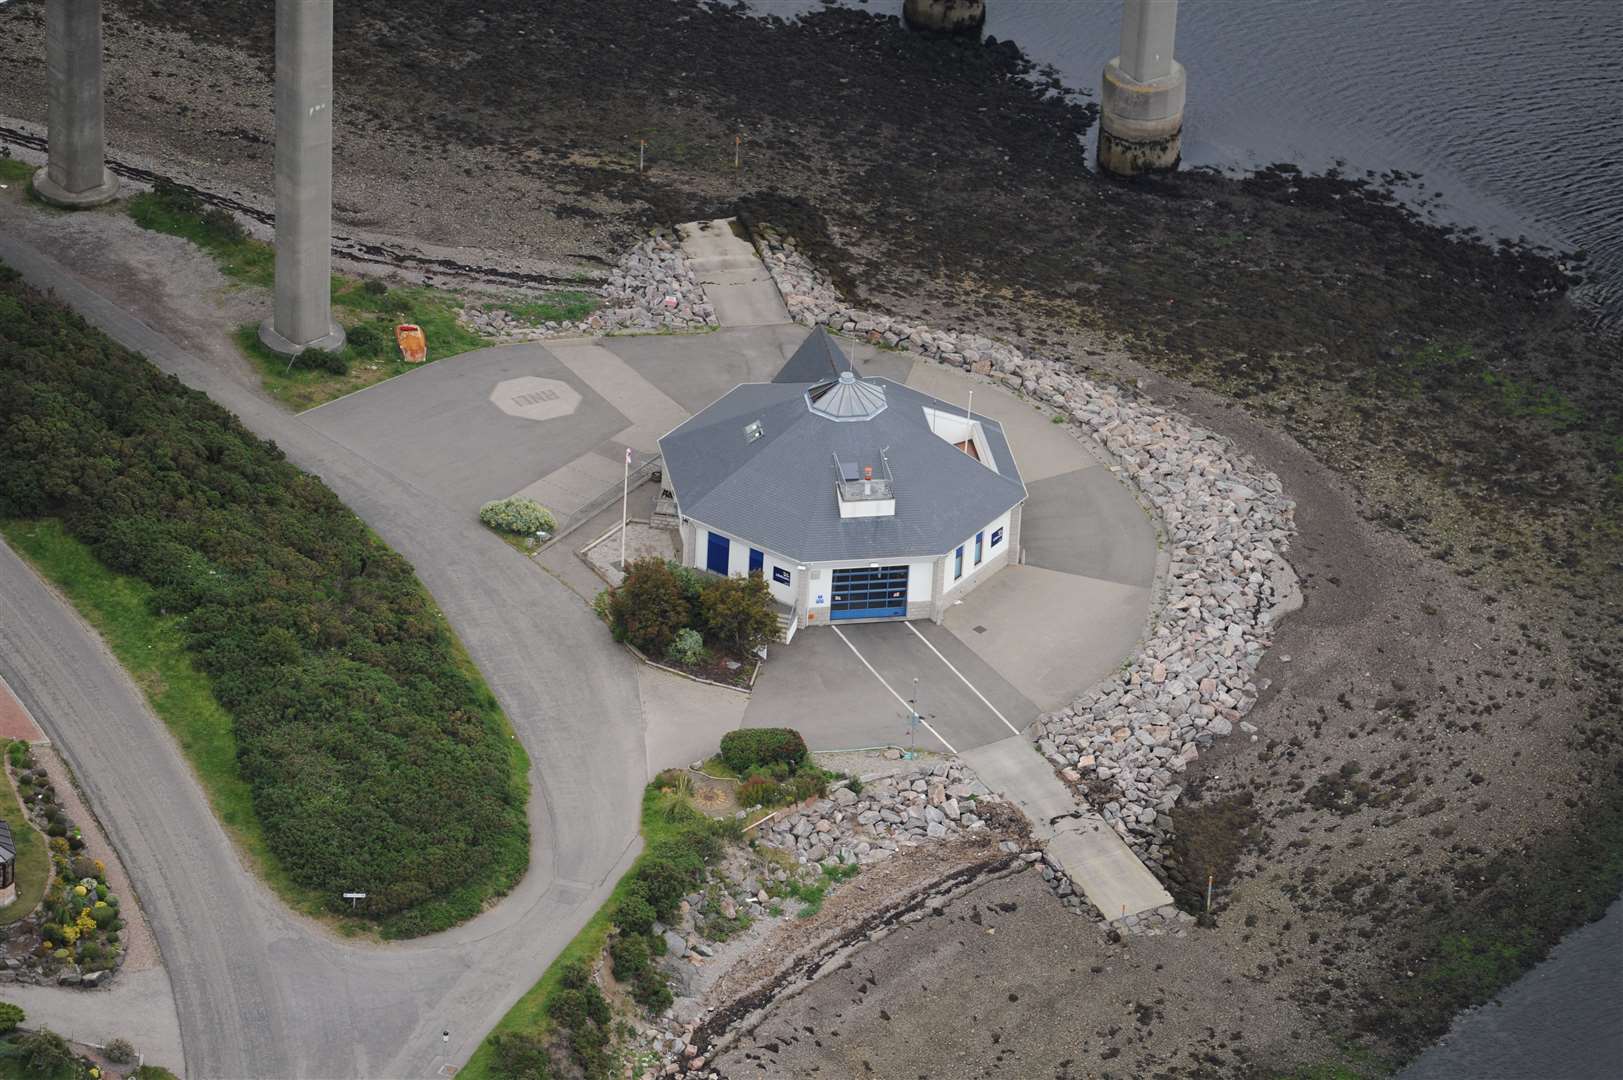 The North Kessock lifeboat station is around 620 miles from HQ in Poole. The mile challenge aims to get supporters to help complete the distance.